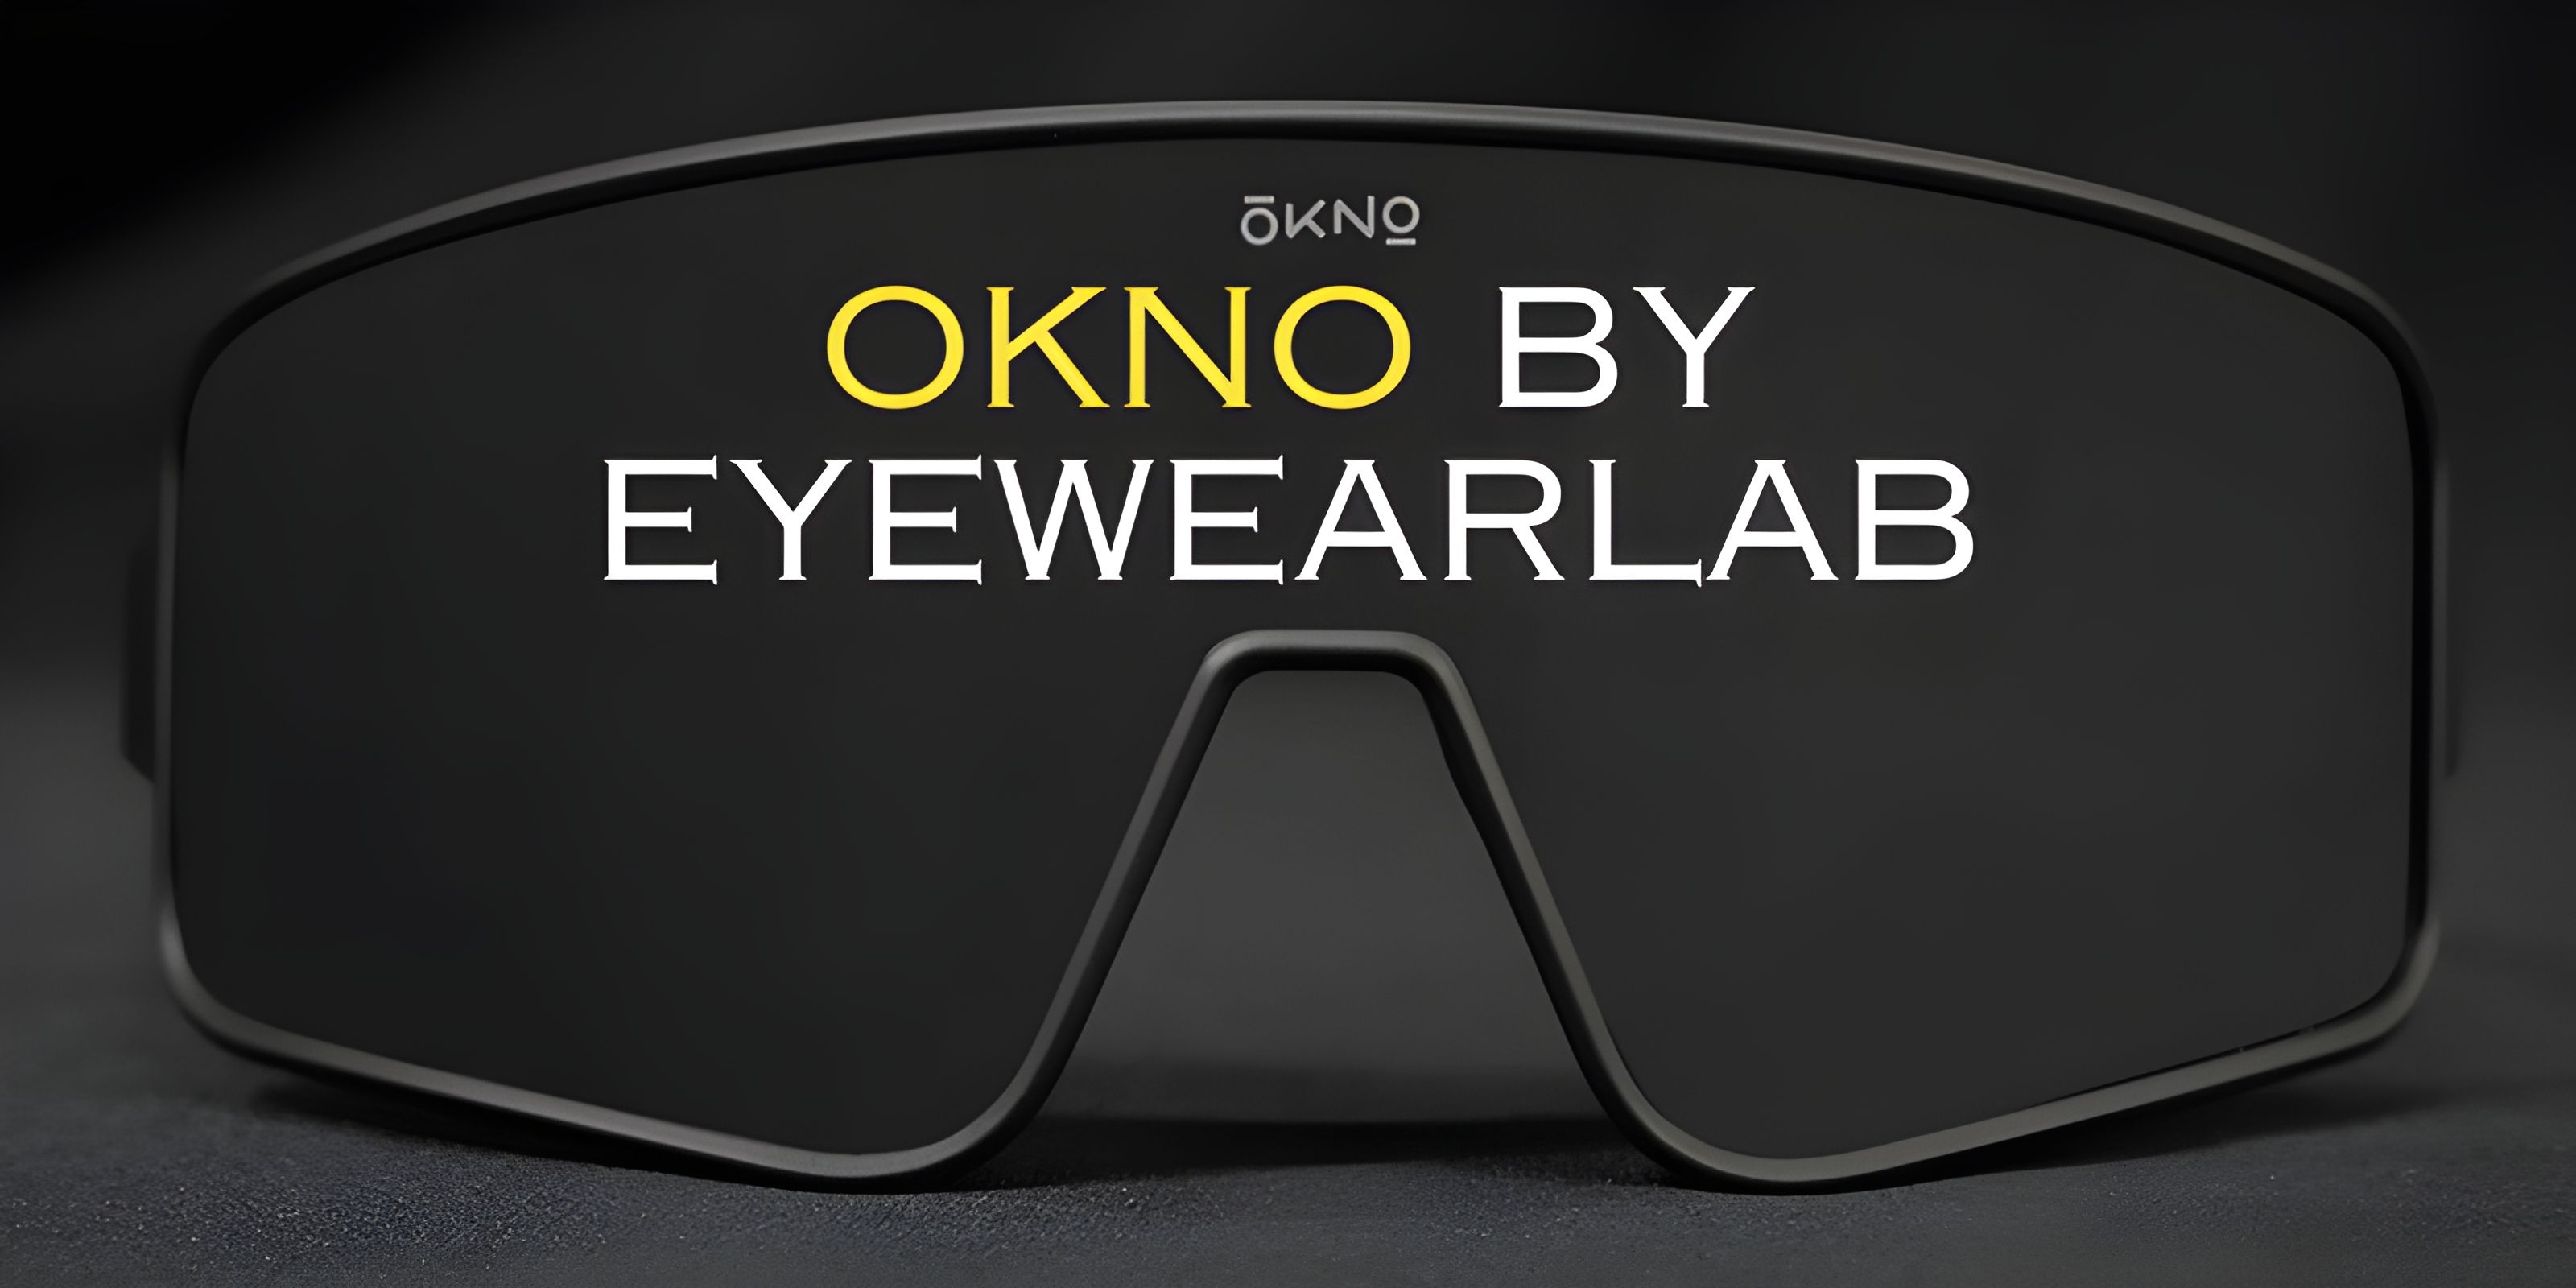 OKNO by Eyewearlabs: New Sports Sunglasses Changing the Game in India